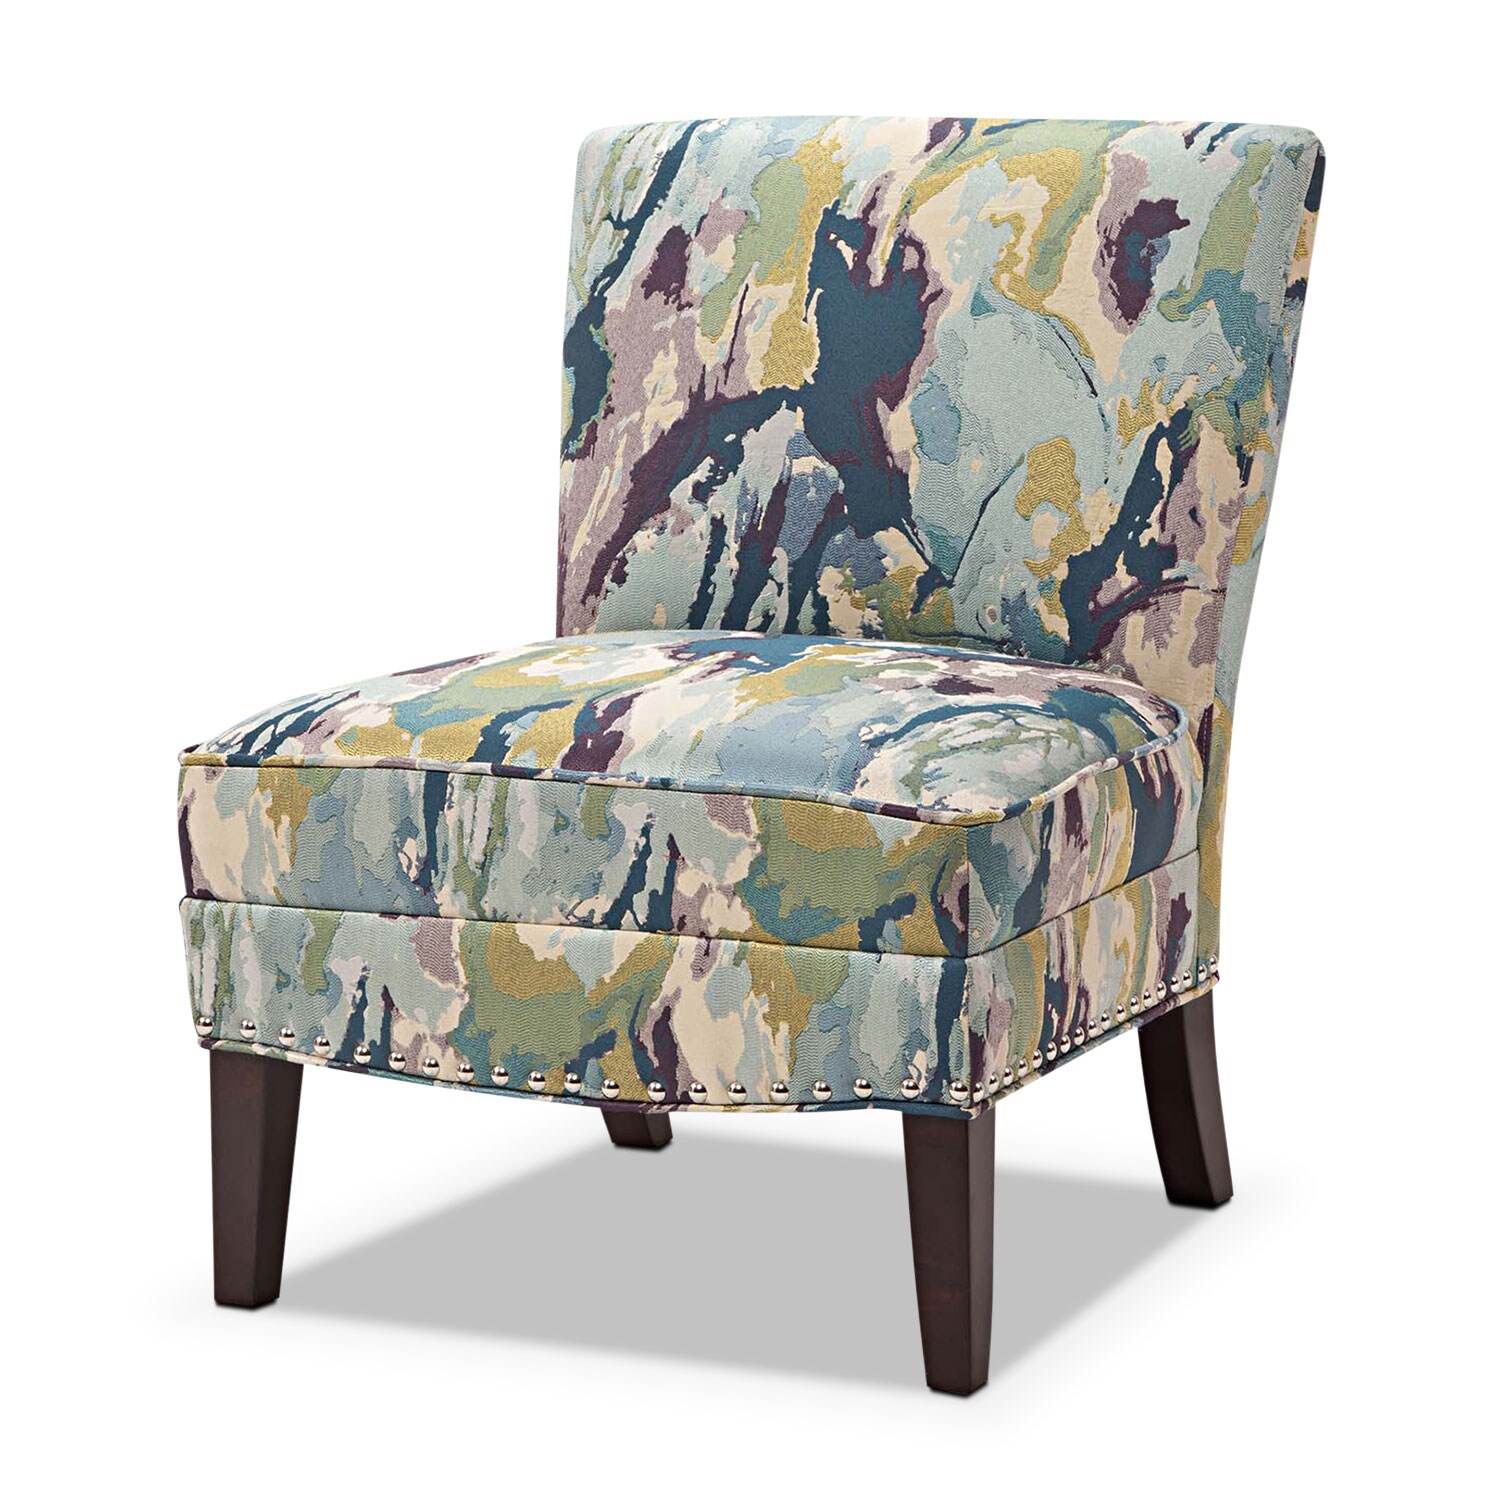 Cami Accent Chair - Watercolor | Value City Furniture